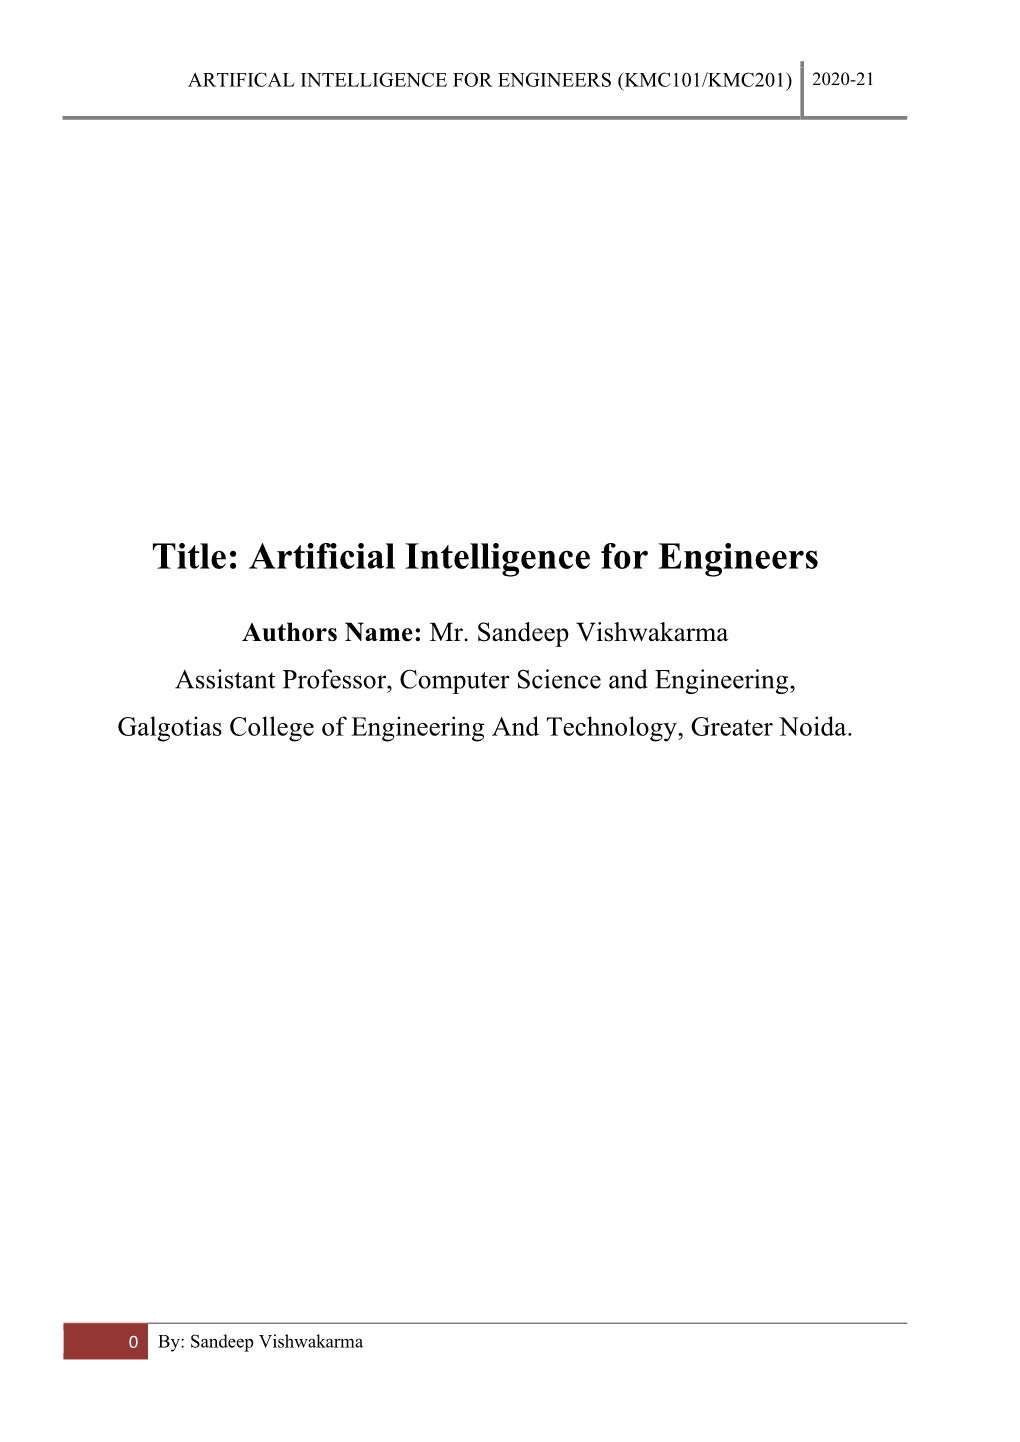 Artifical Intelligence for Engineers (Kmc101/Kmc201) 2020-21